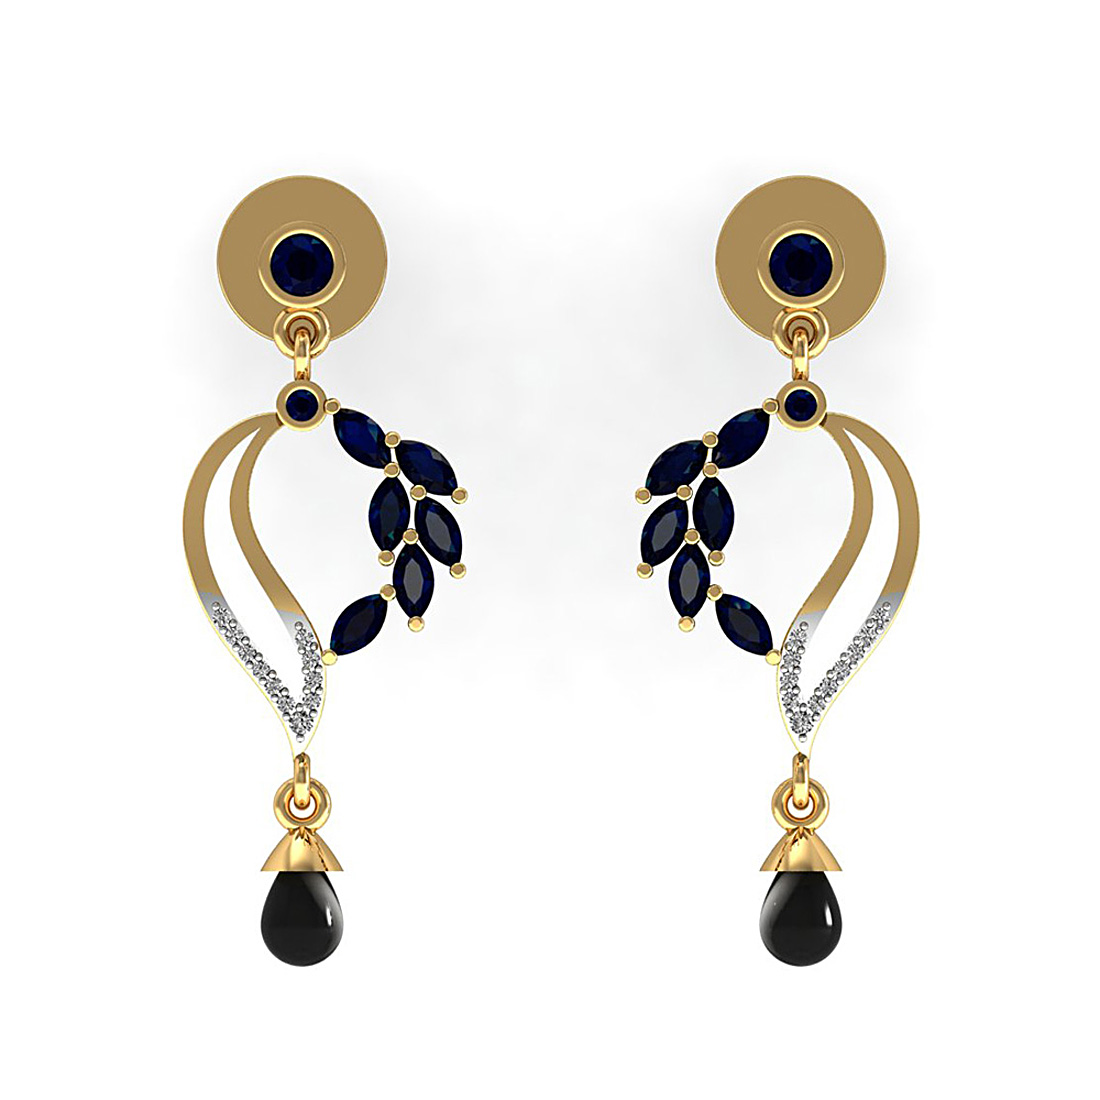 Diamond & onyx dangle drop earrings made in 18k gold with sapphire